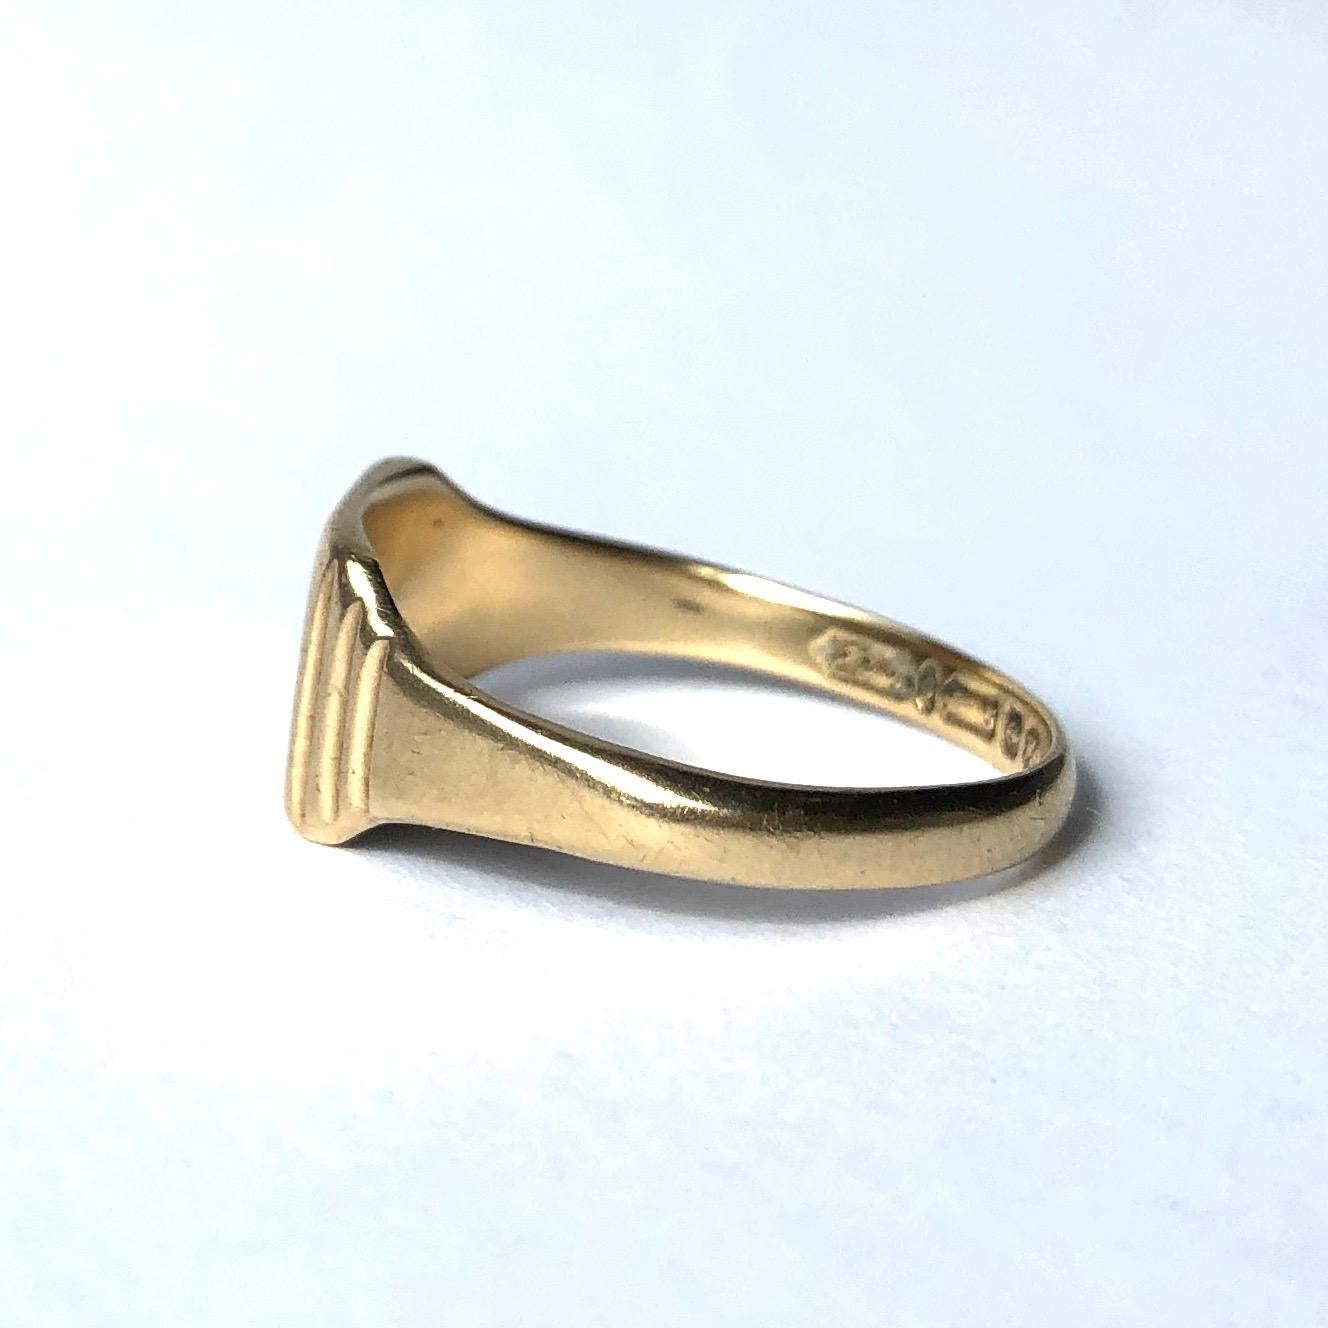 This signet ring has a face with the initials IM engraved into it. Either side of the face is step detail. Made in Birmingham, England. 

Ring Size: O 1/2 or 7 1/2
Face Dimensions: 8.5x10mm 

Weight: 2.83g